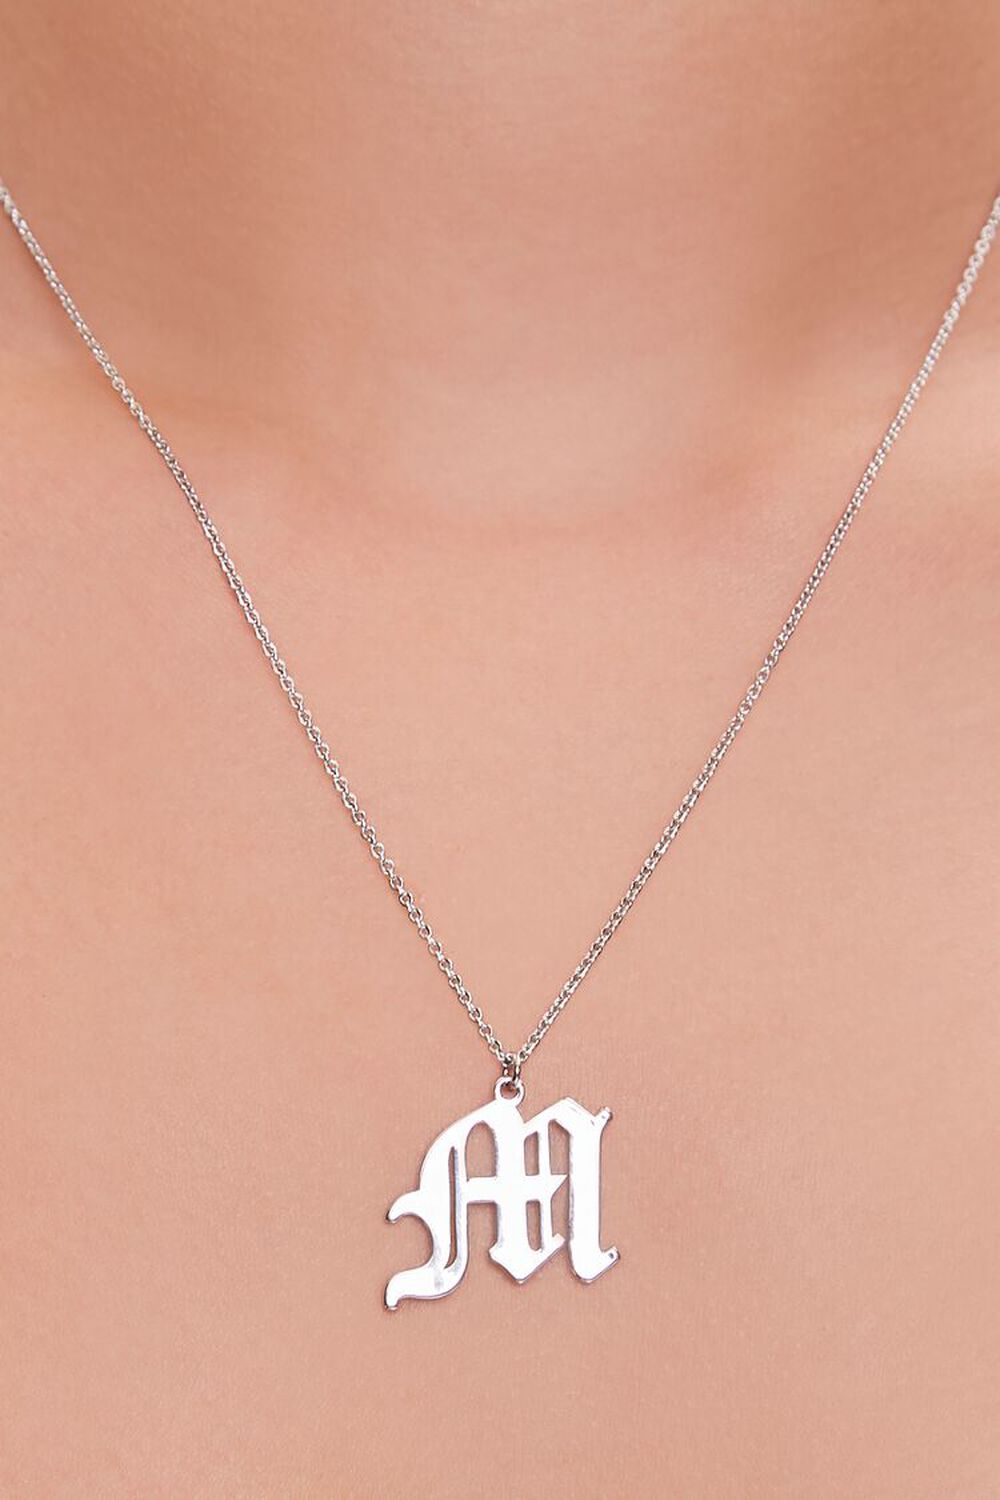 SILVER/M Initial Pendant Chain Necklace, image 1